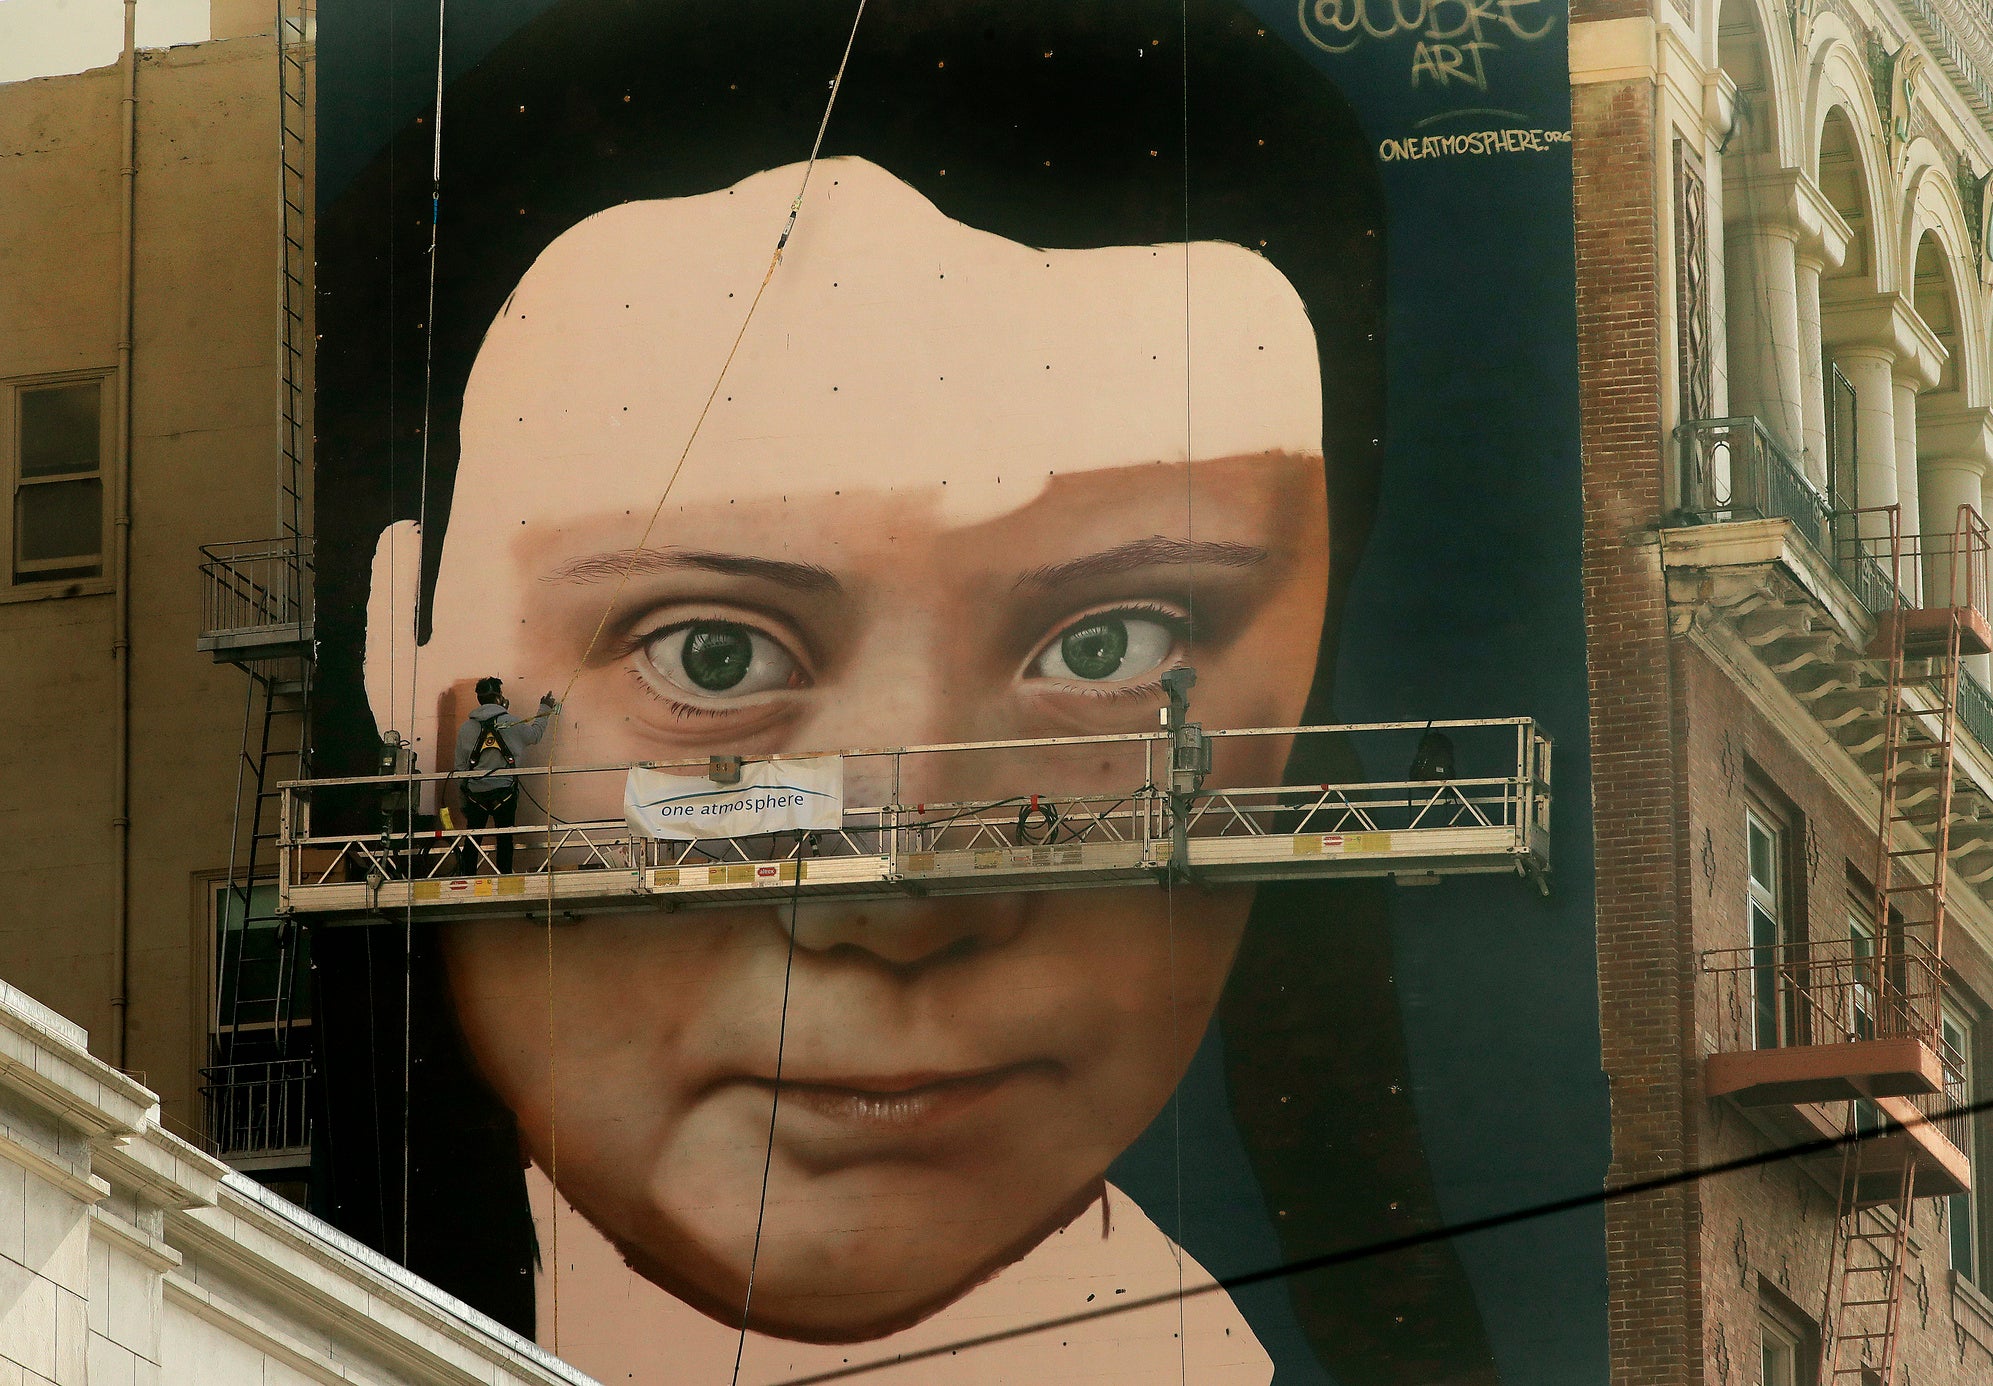 The eight-storey mural of Greta Thunberg has been painted on a building in downtown San Francisco